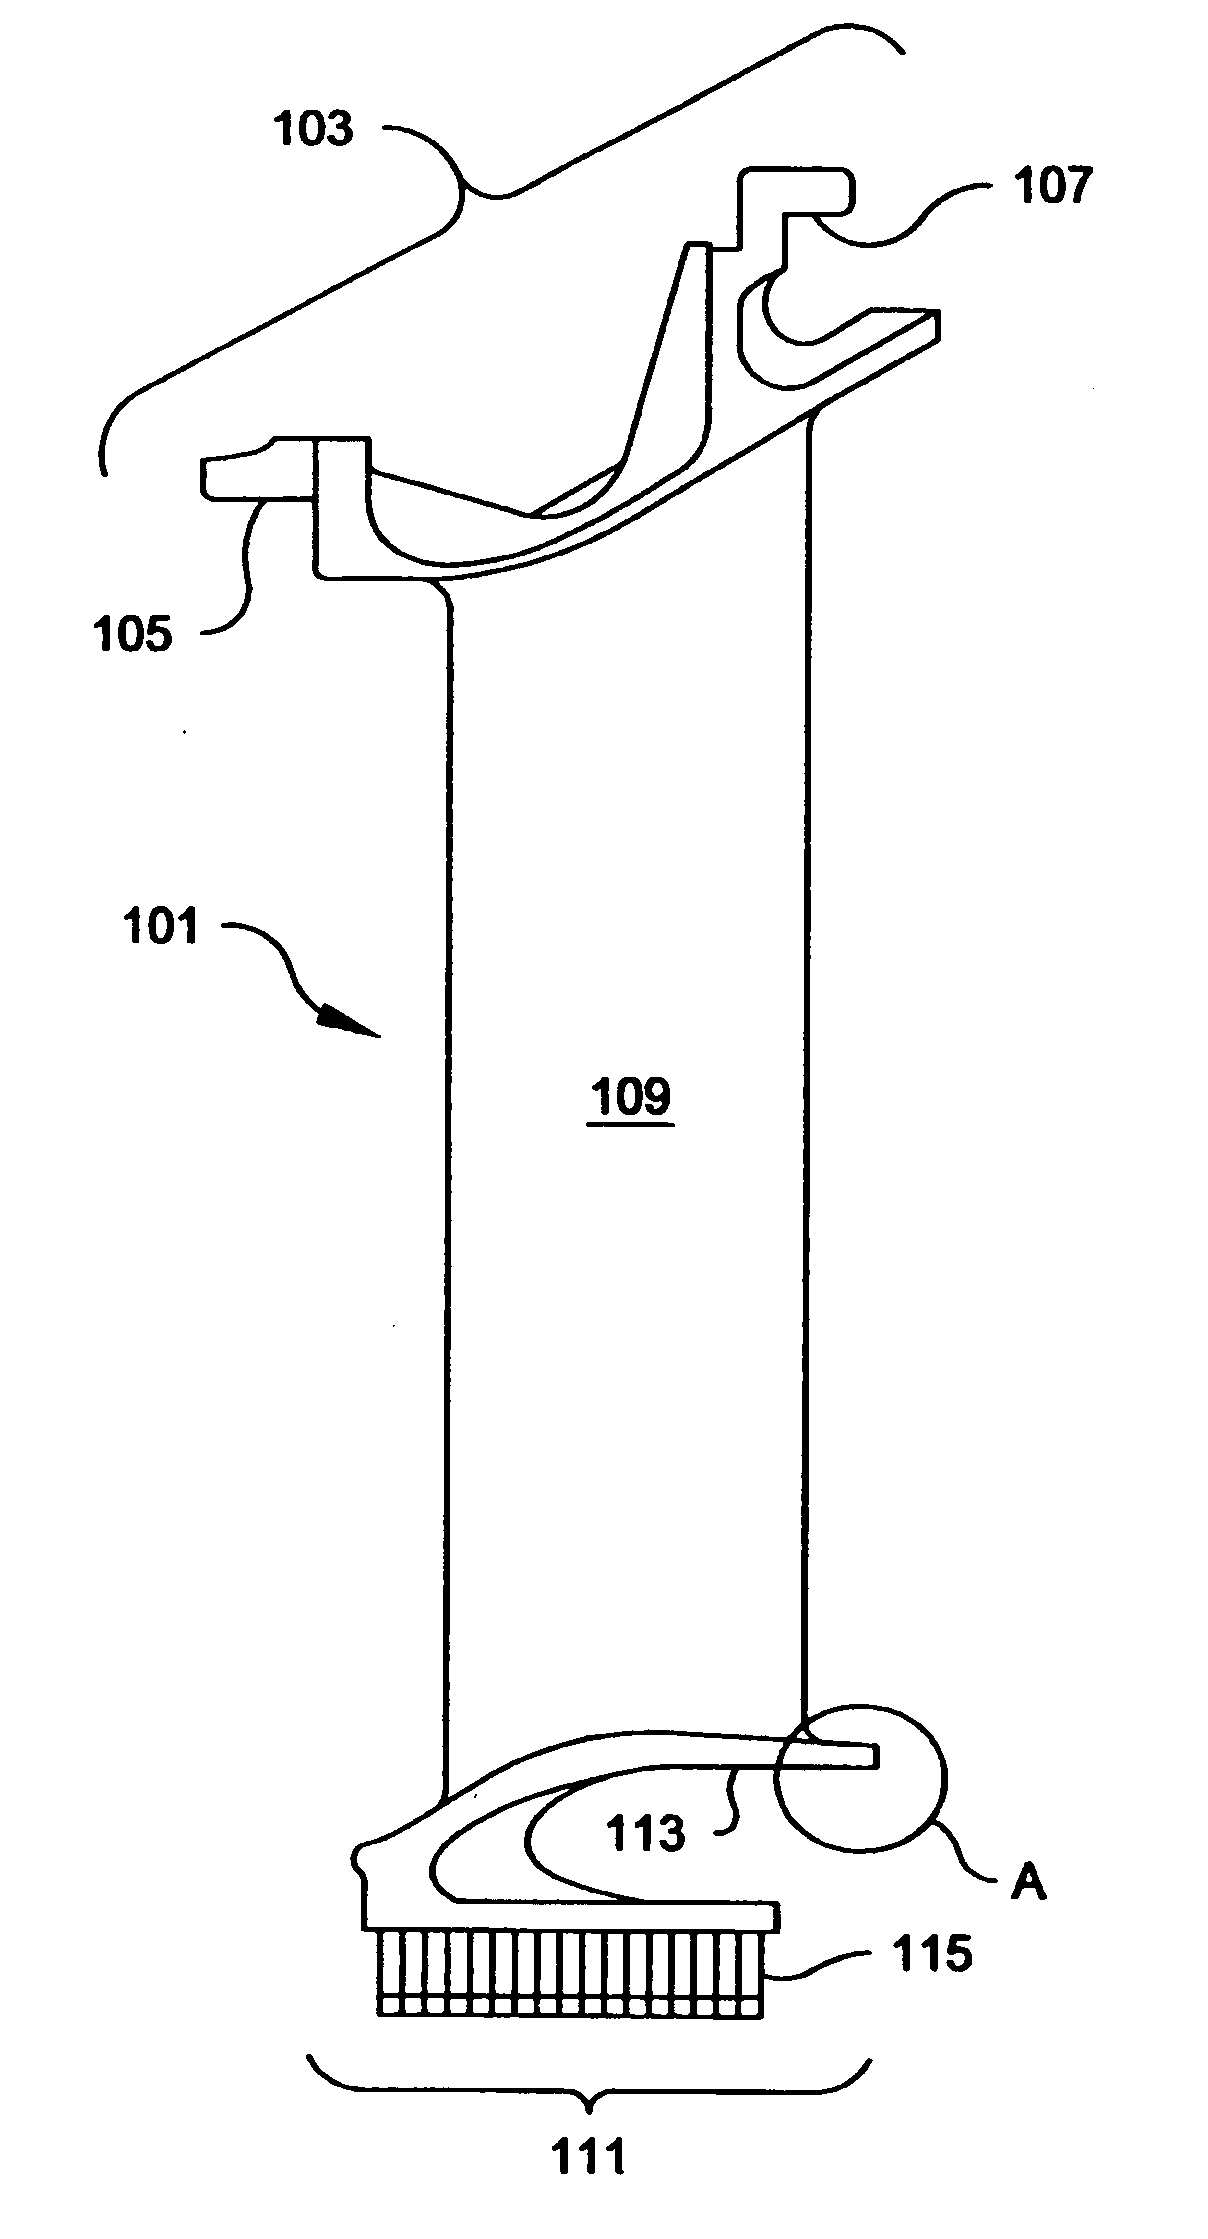 Method for checking surface condition after cleaning